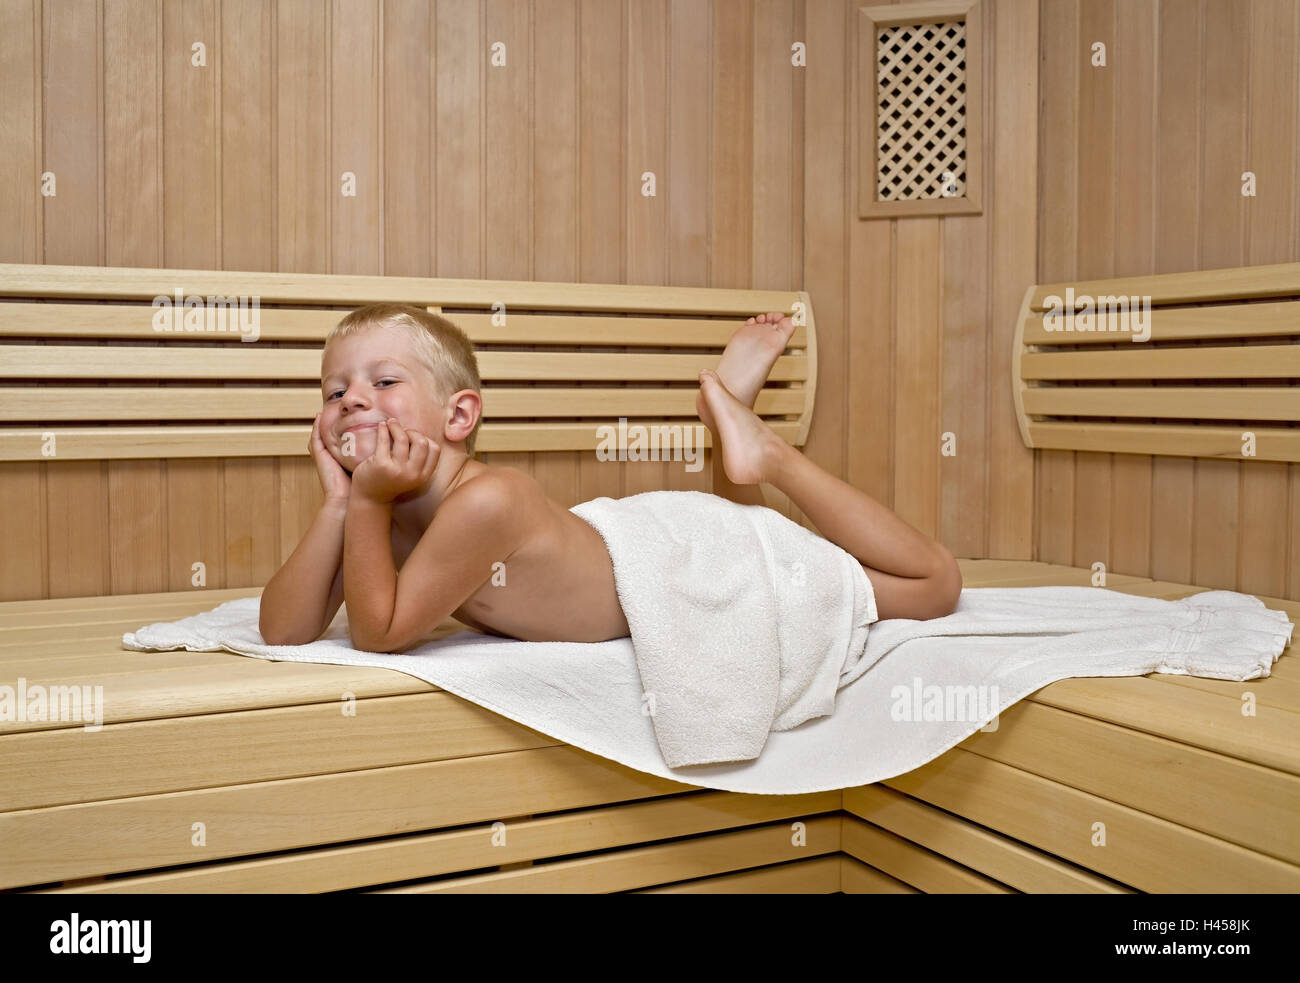 A boy, 5 years, in a sauna, lie, model released, Stock Photo